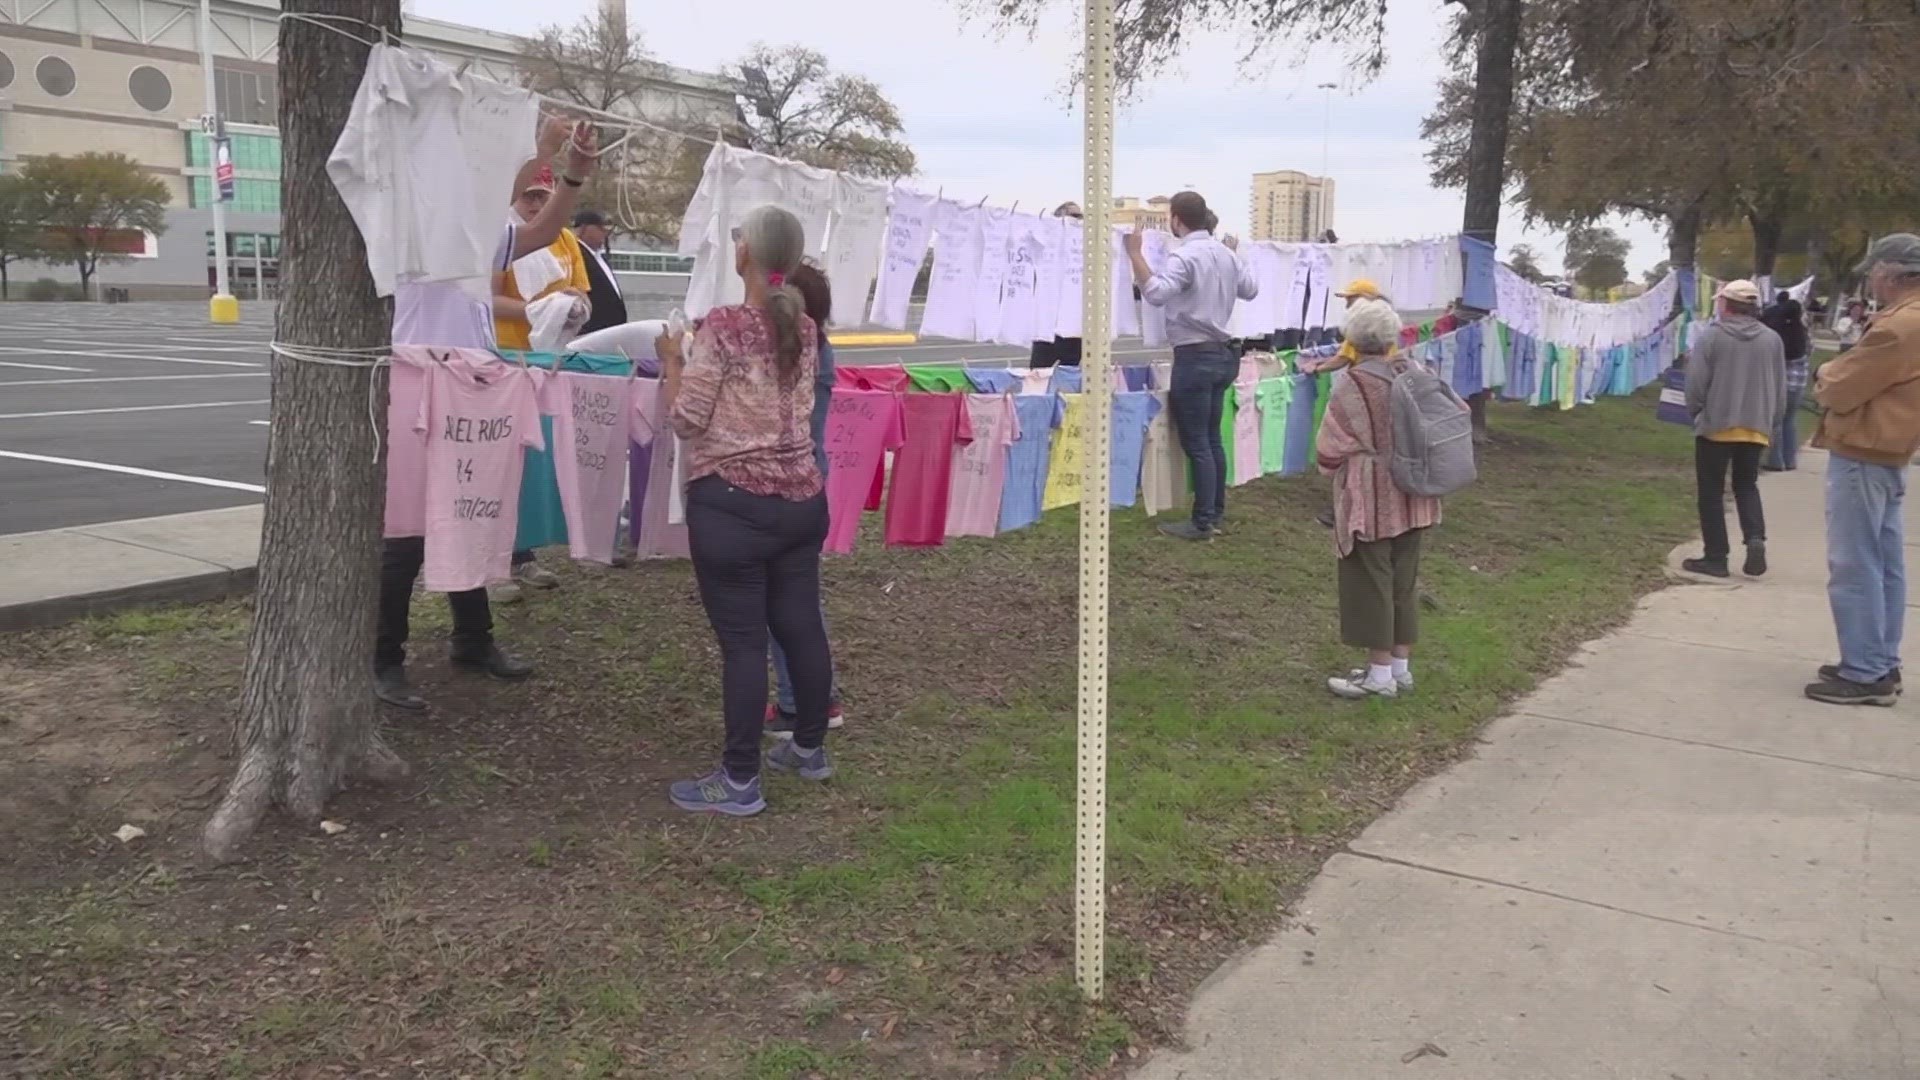 Around 200 shirts line a local street near the Alamodome and each shirt shows the name of a gun violence victim.